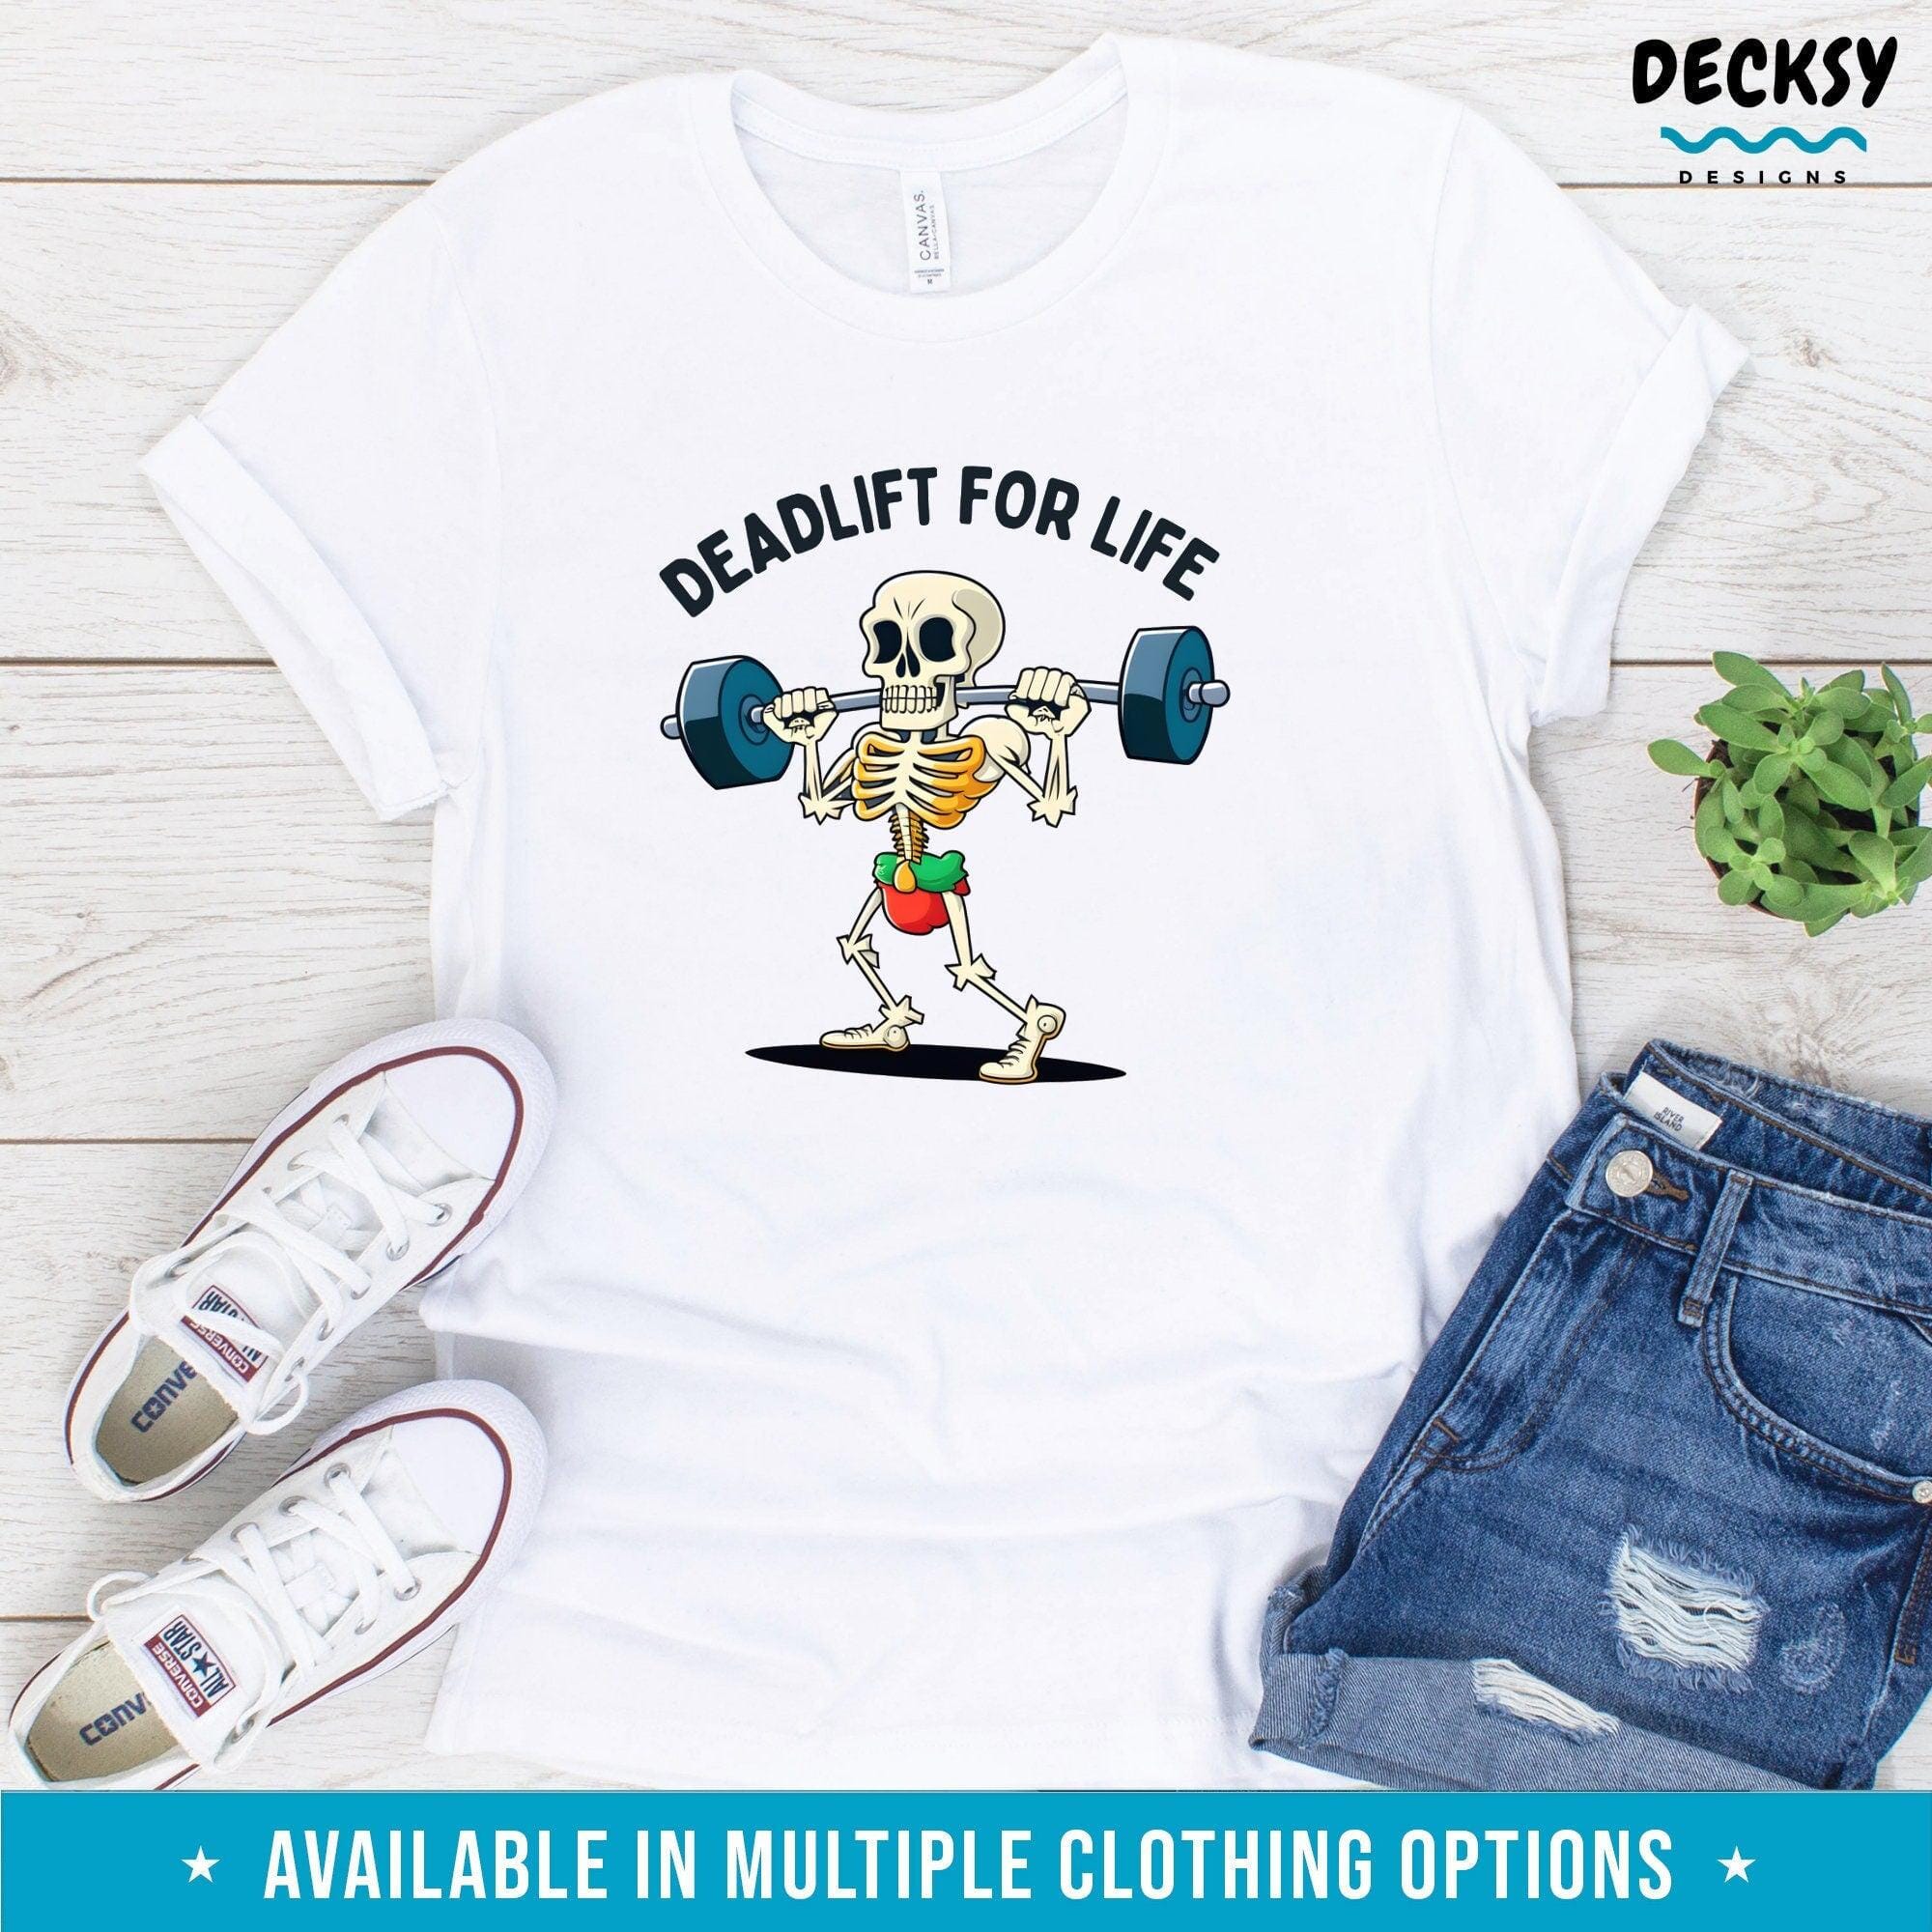 Deadlift Shirt, Weightlifting Gift-Clothing:Gender-Neutral Adult Clothing:Tops & Tees:T-shirts:Graphic Tees-DecksyDesigns